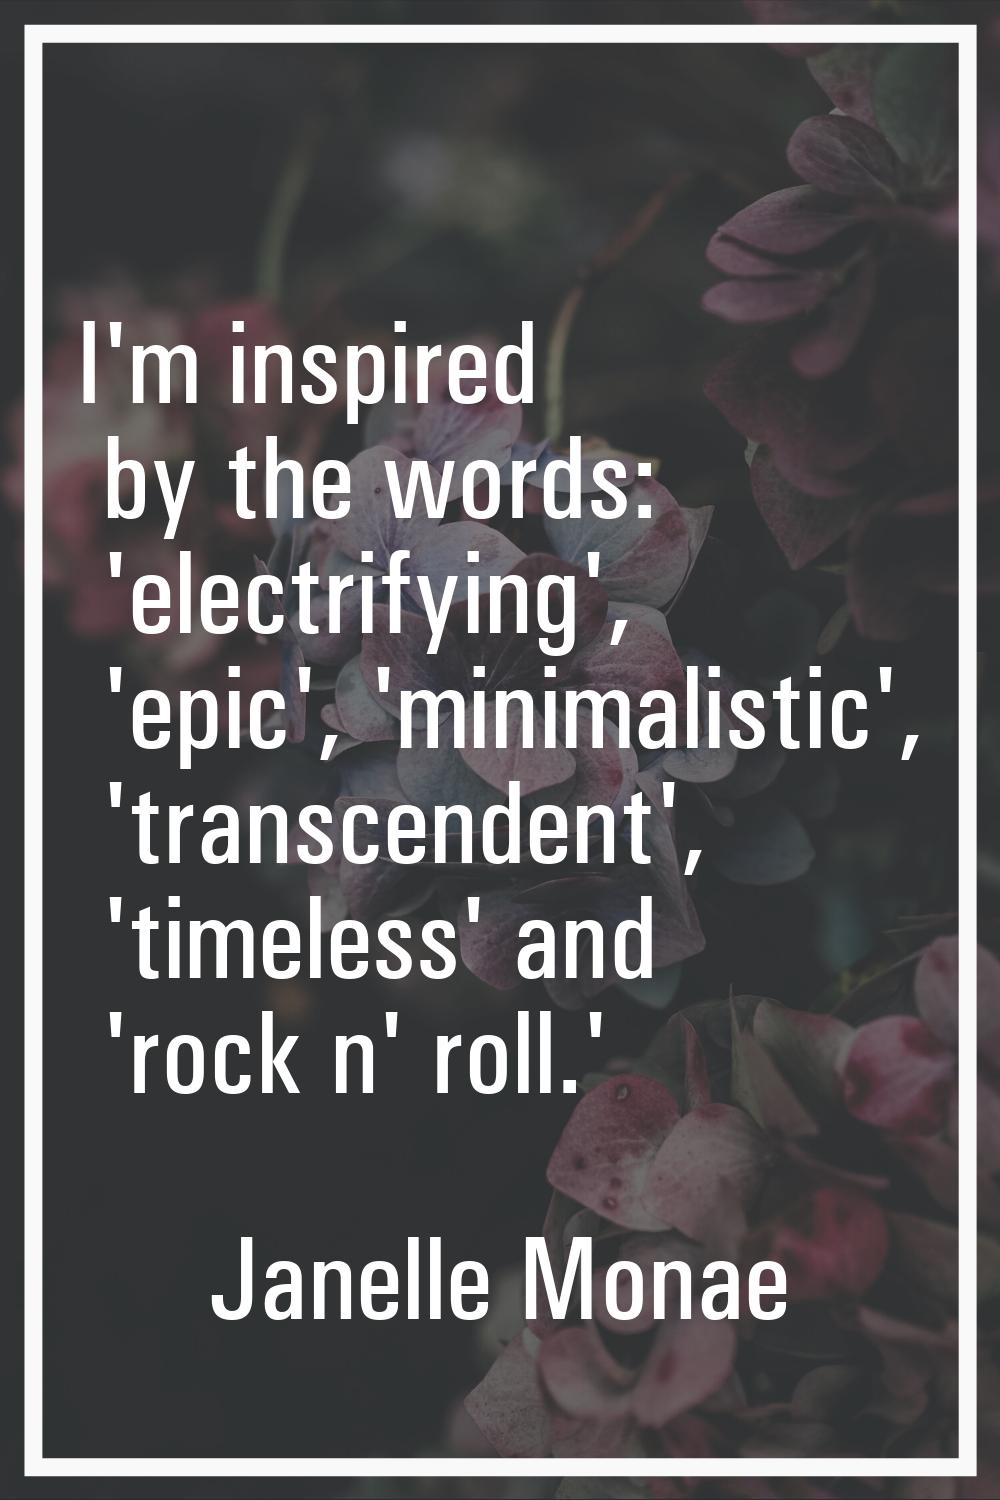 I'm inspired by the words: 'electrifying', 'epic', 'minimalistic', 'transcendent', 'timeless' and '